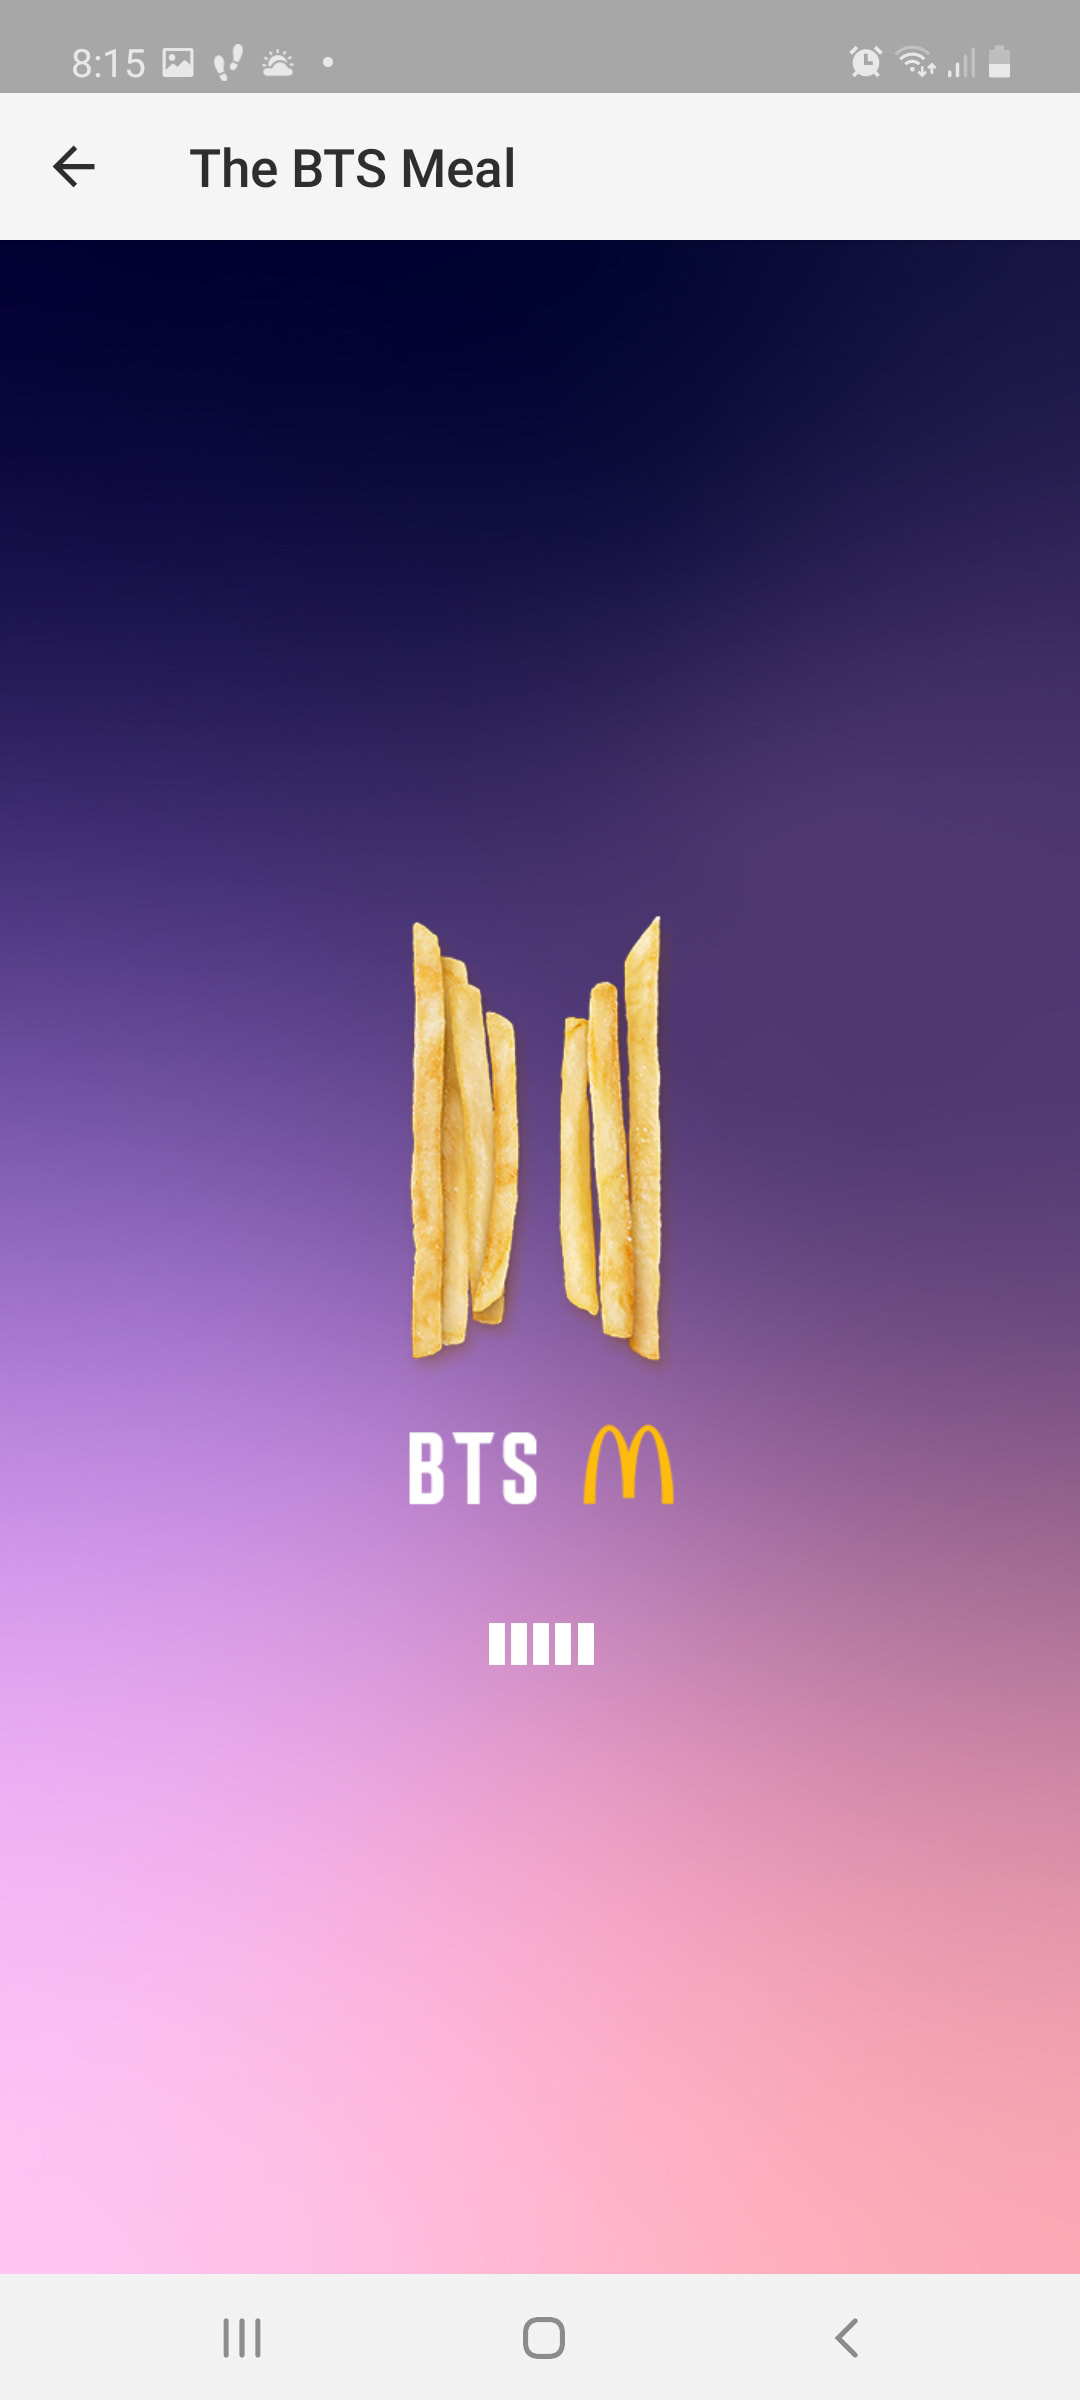 BTS McDonald's Merch Available Now With Meal Deal Purchase